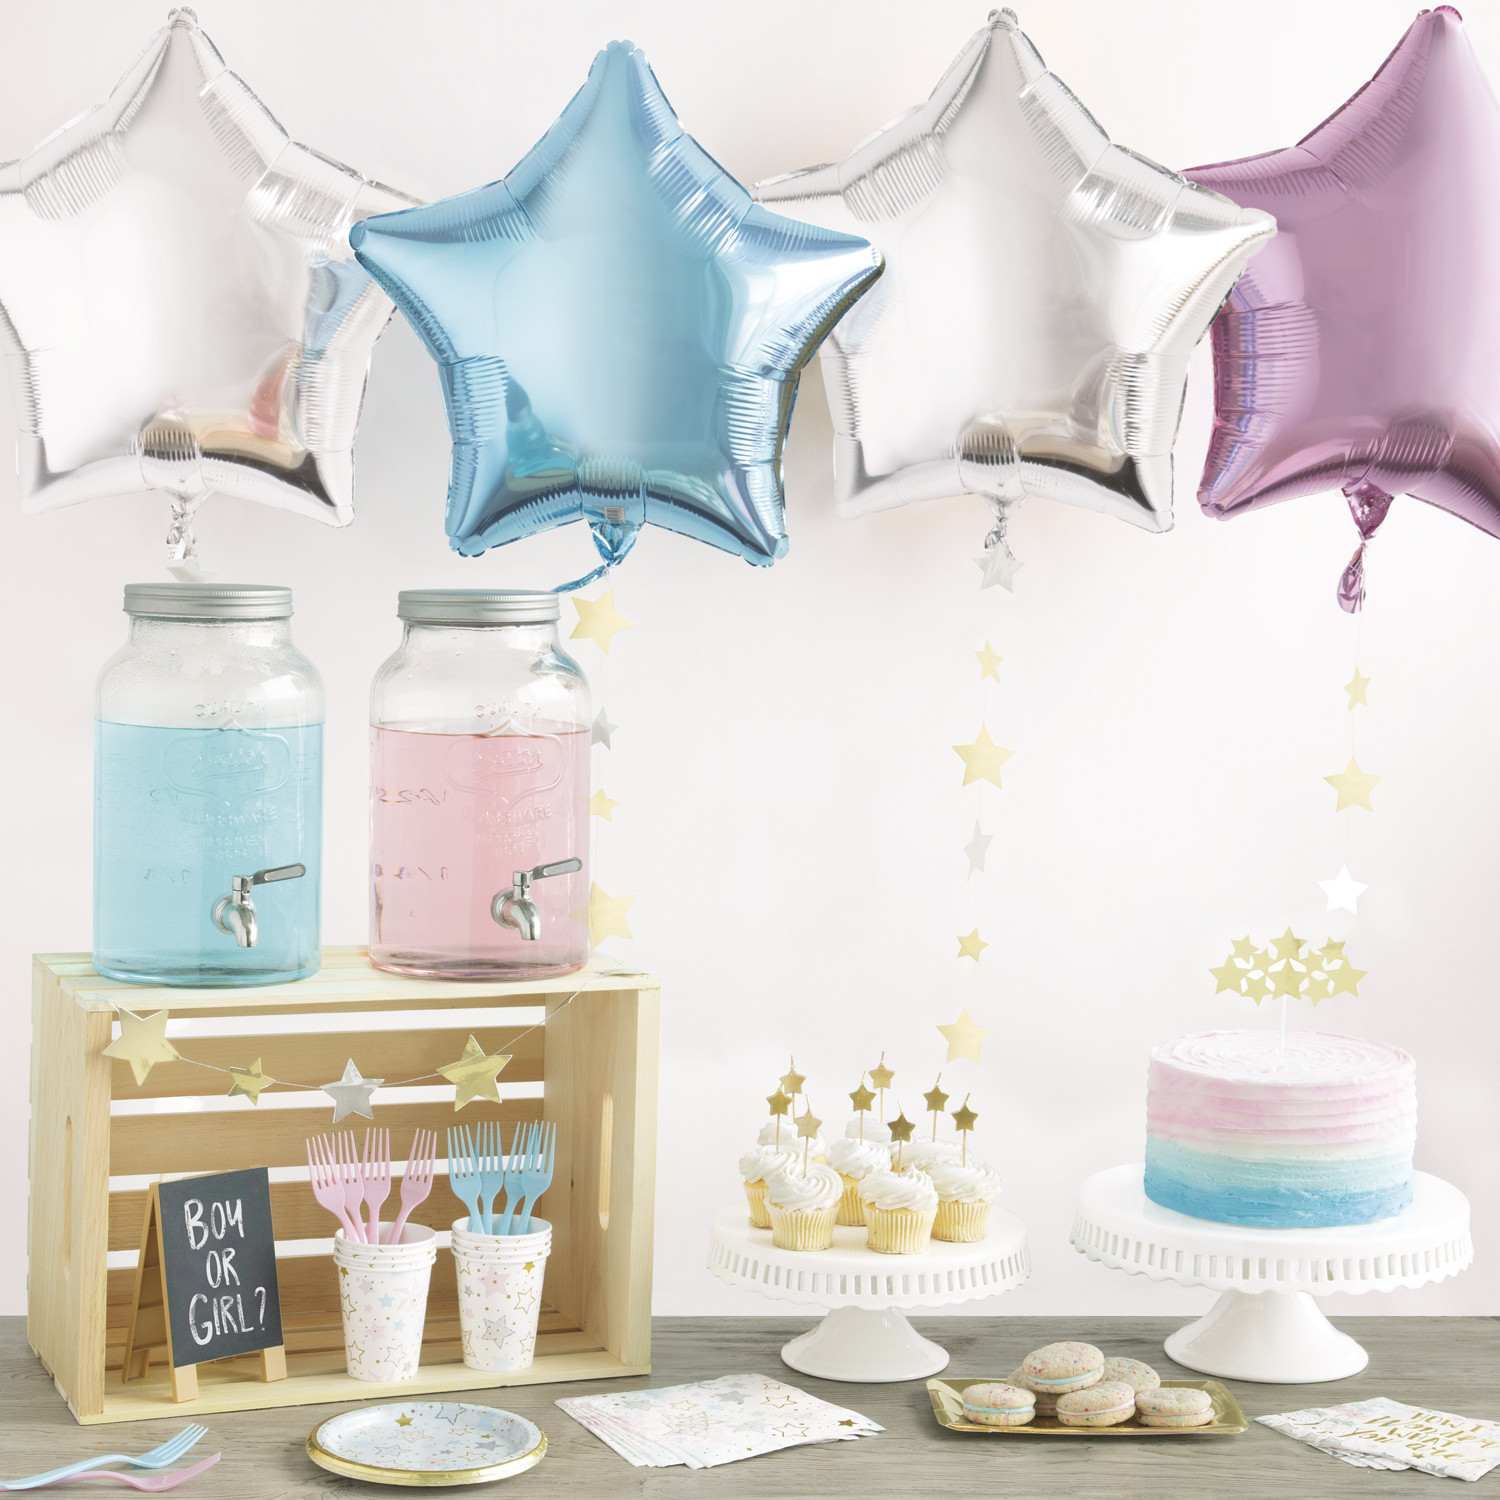 Cool Ideas For Gender Reveal Party
 Gender Reveal Party Ideas